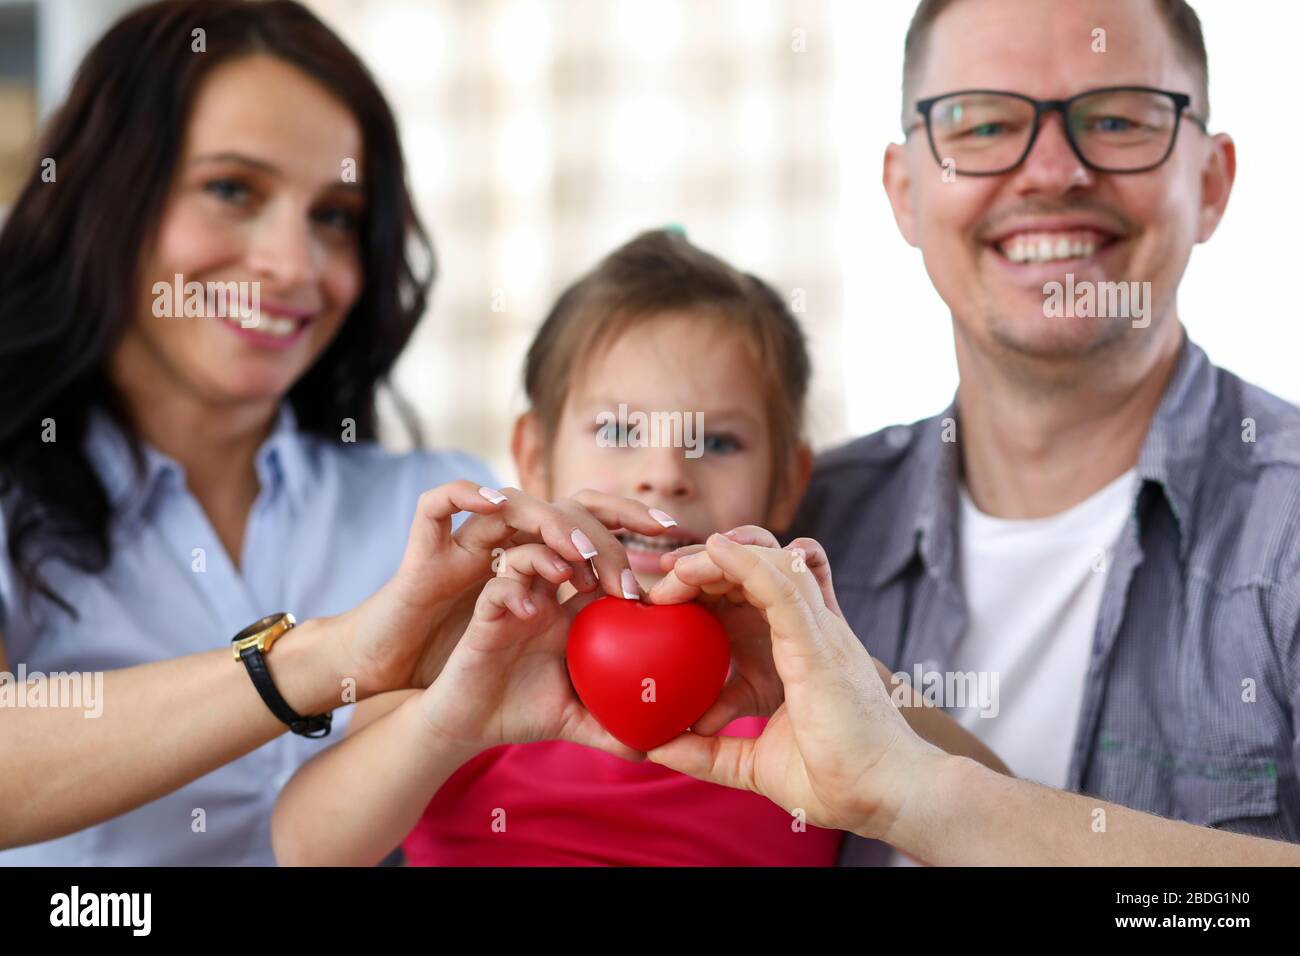 Smiling parents with kid Stock Photo